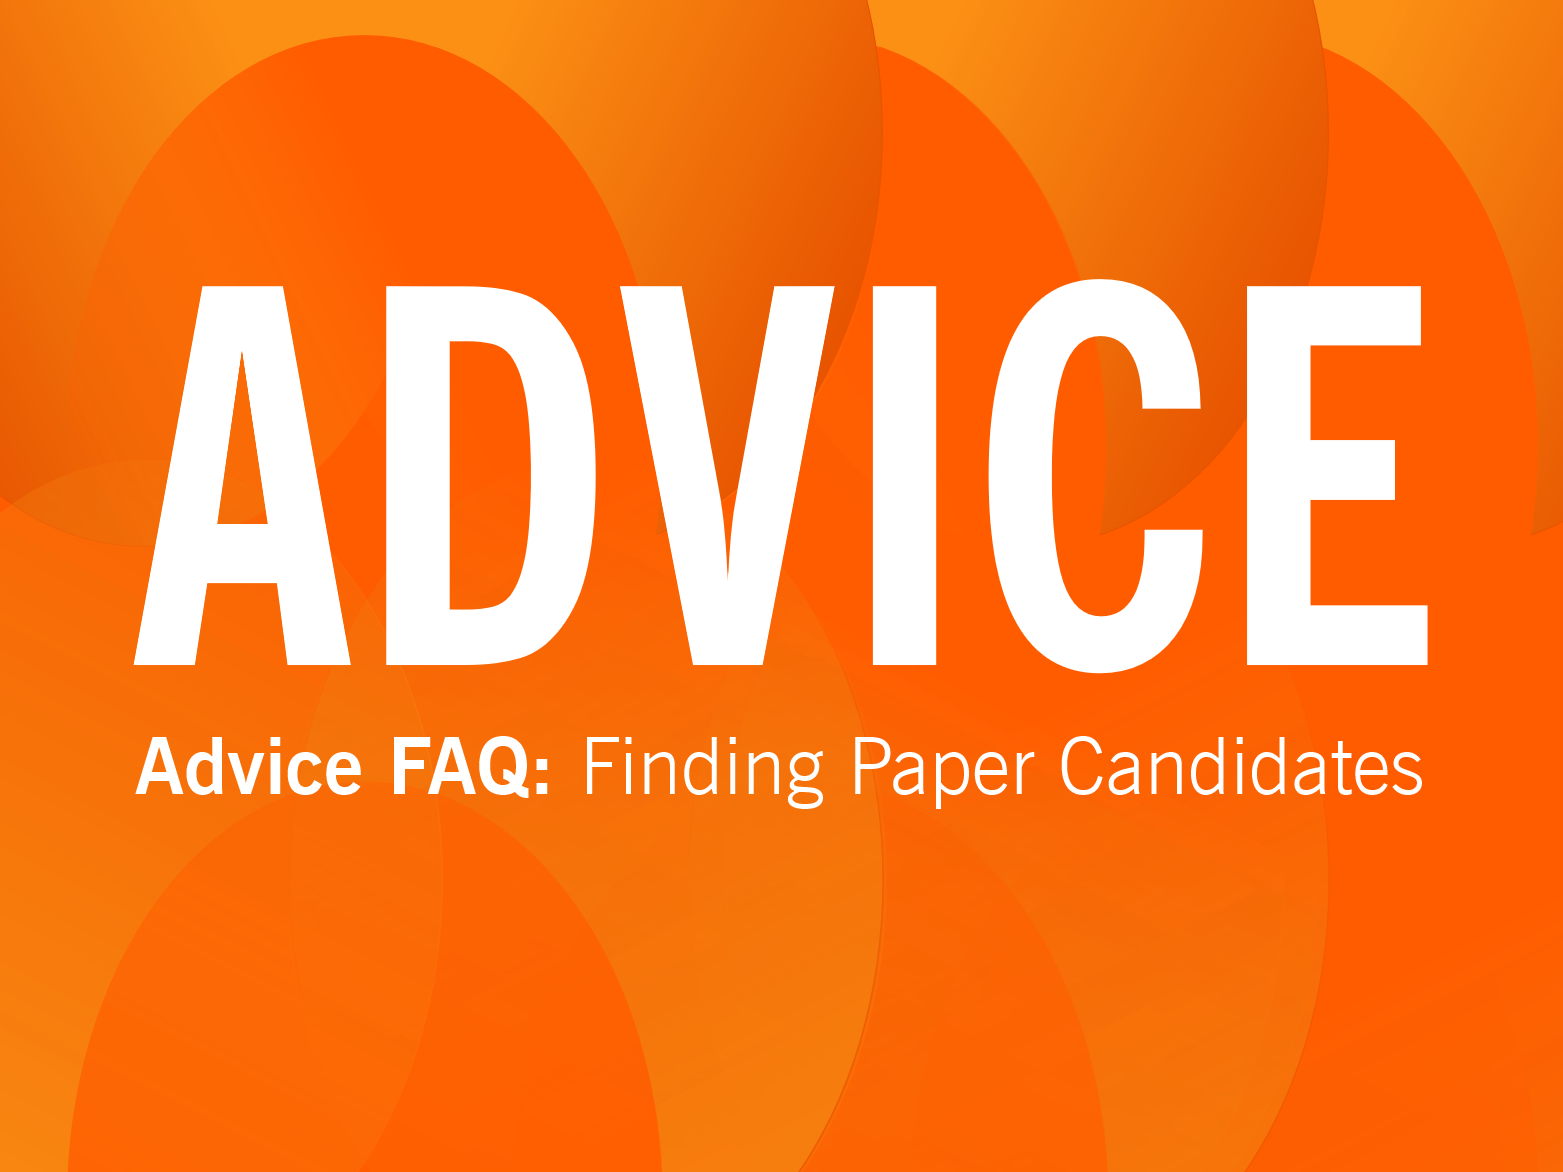 ADVICE: Find your next set of paper candidates